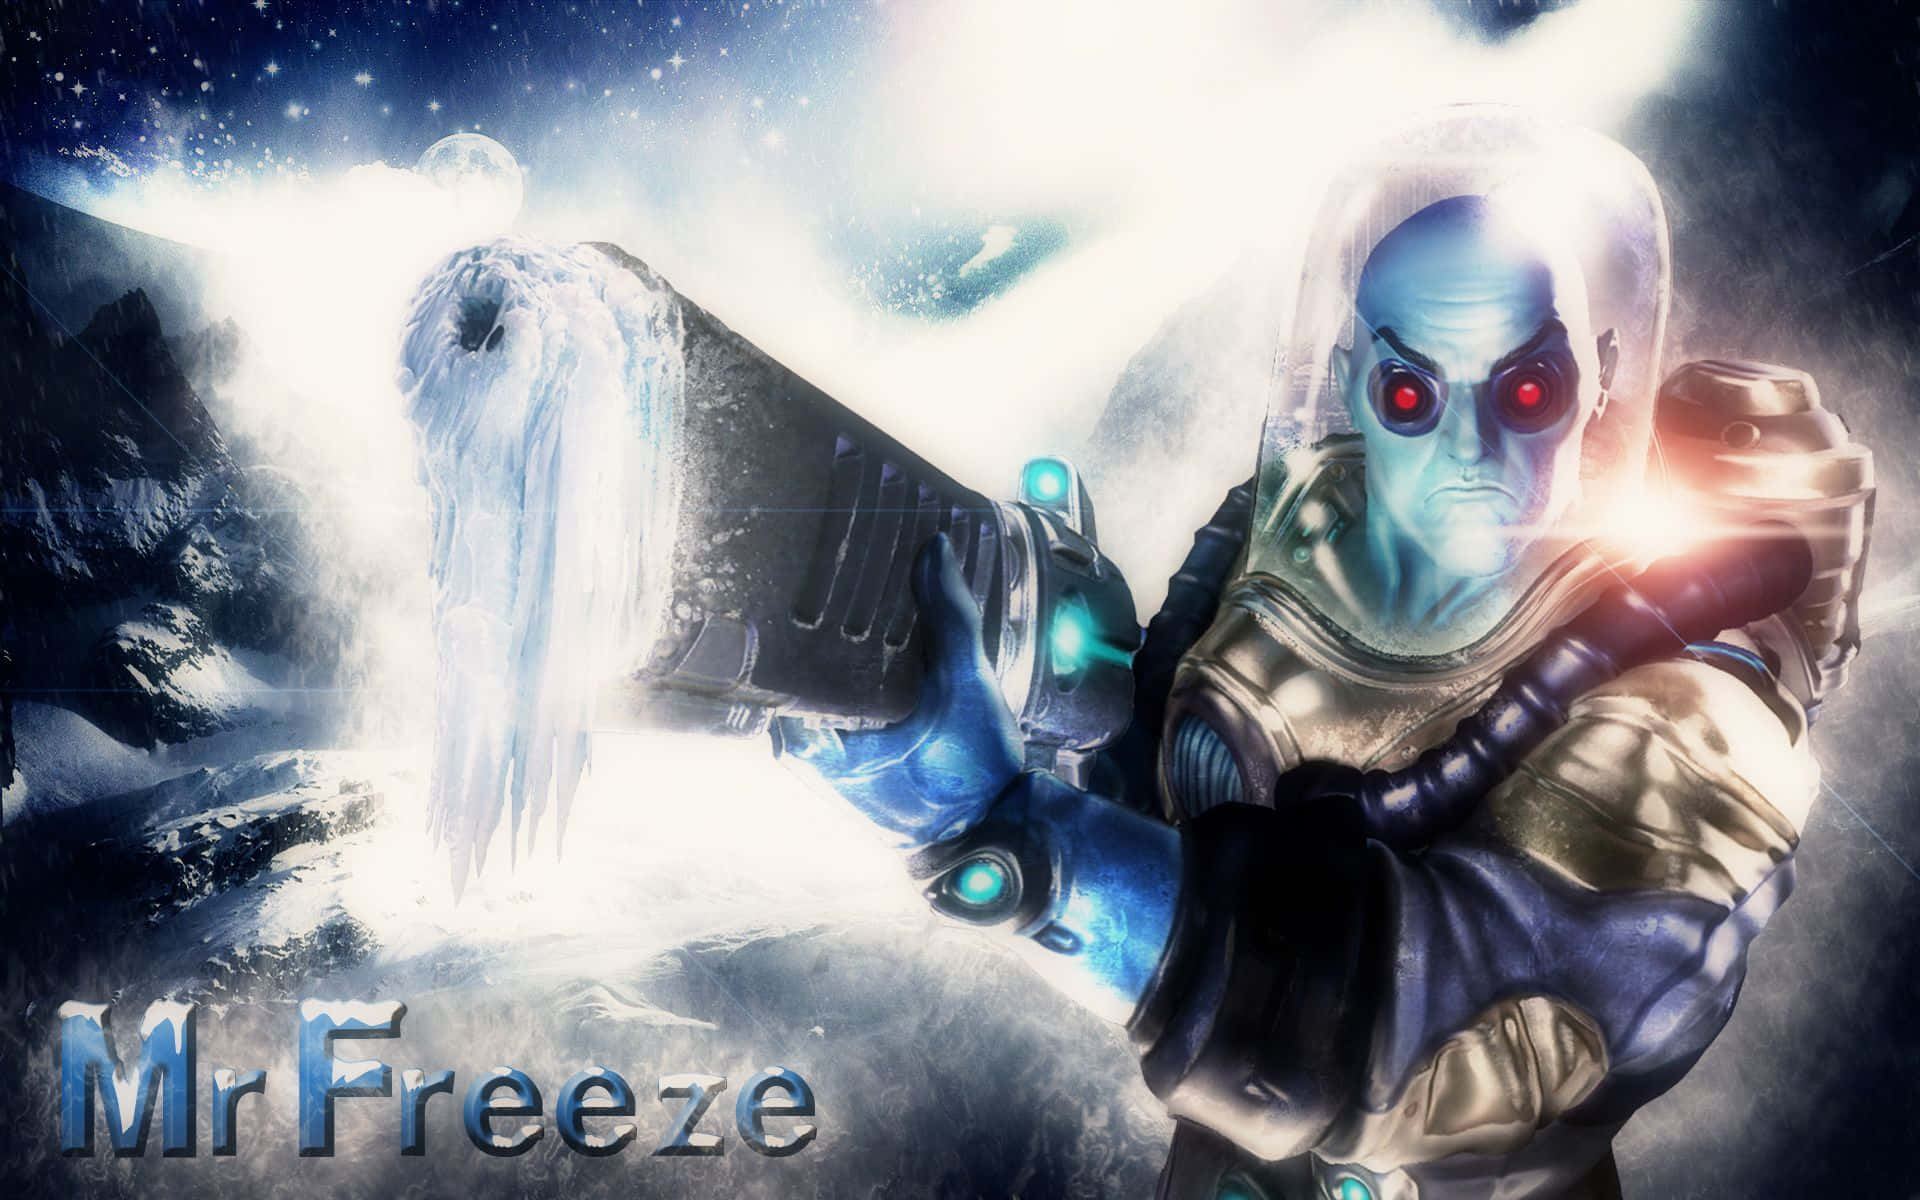 Chilling Gaze of Mr. Freeze - The Cold-hearted Villain Wallpaper